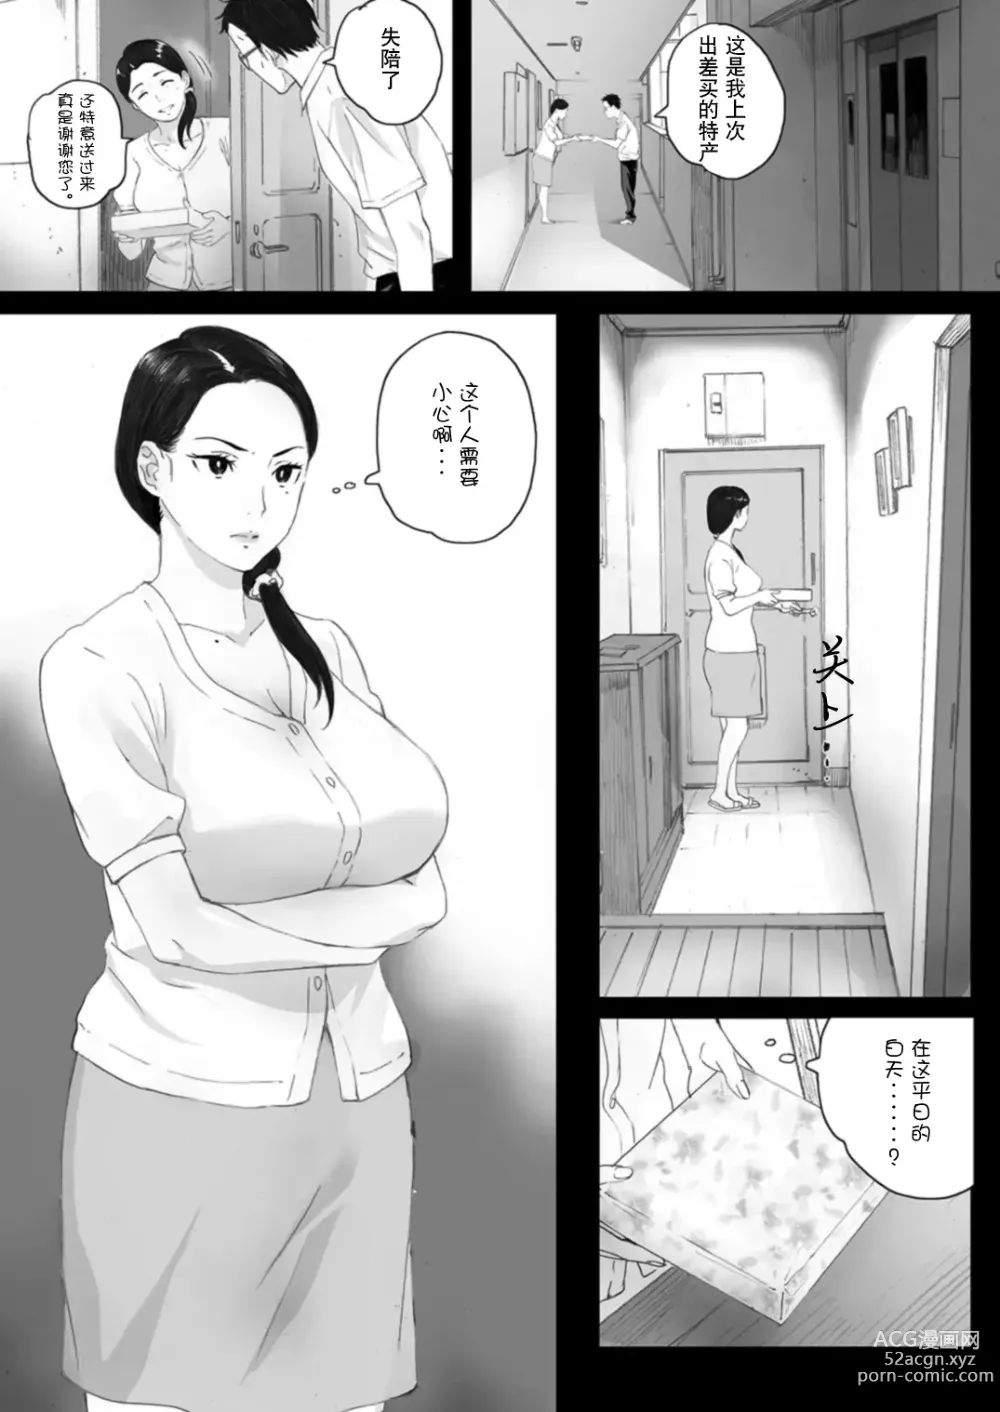 Page 10 of doujinshi 706 rooms